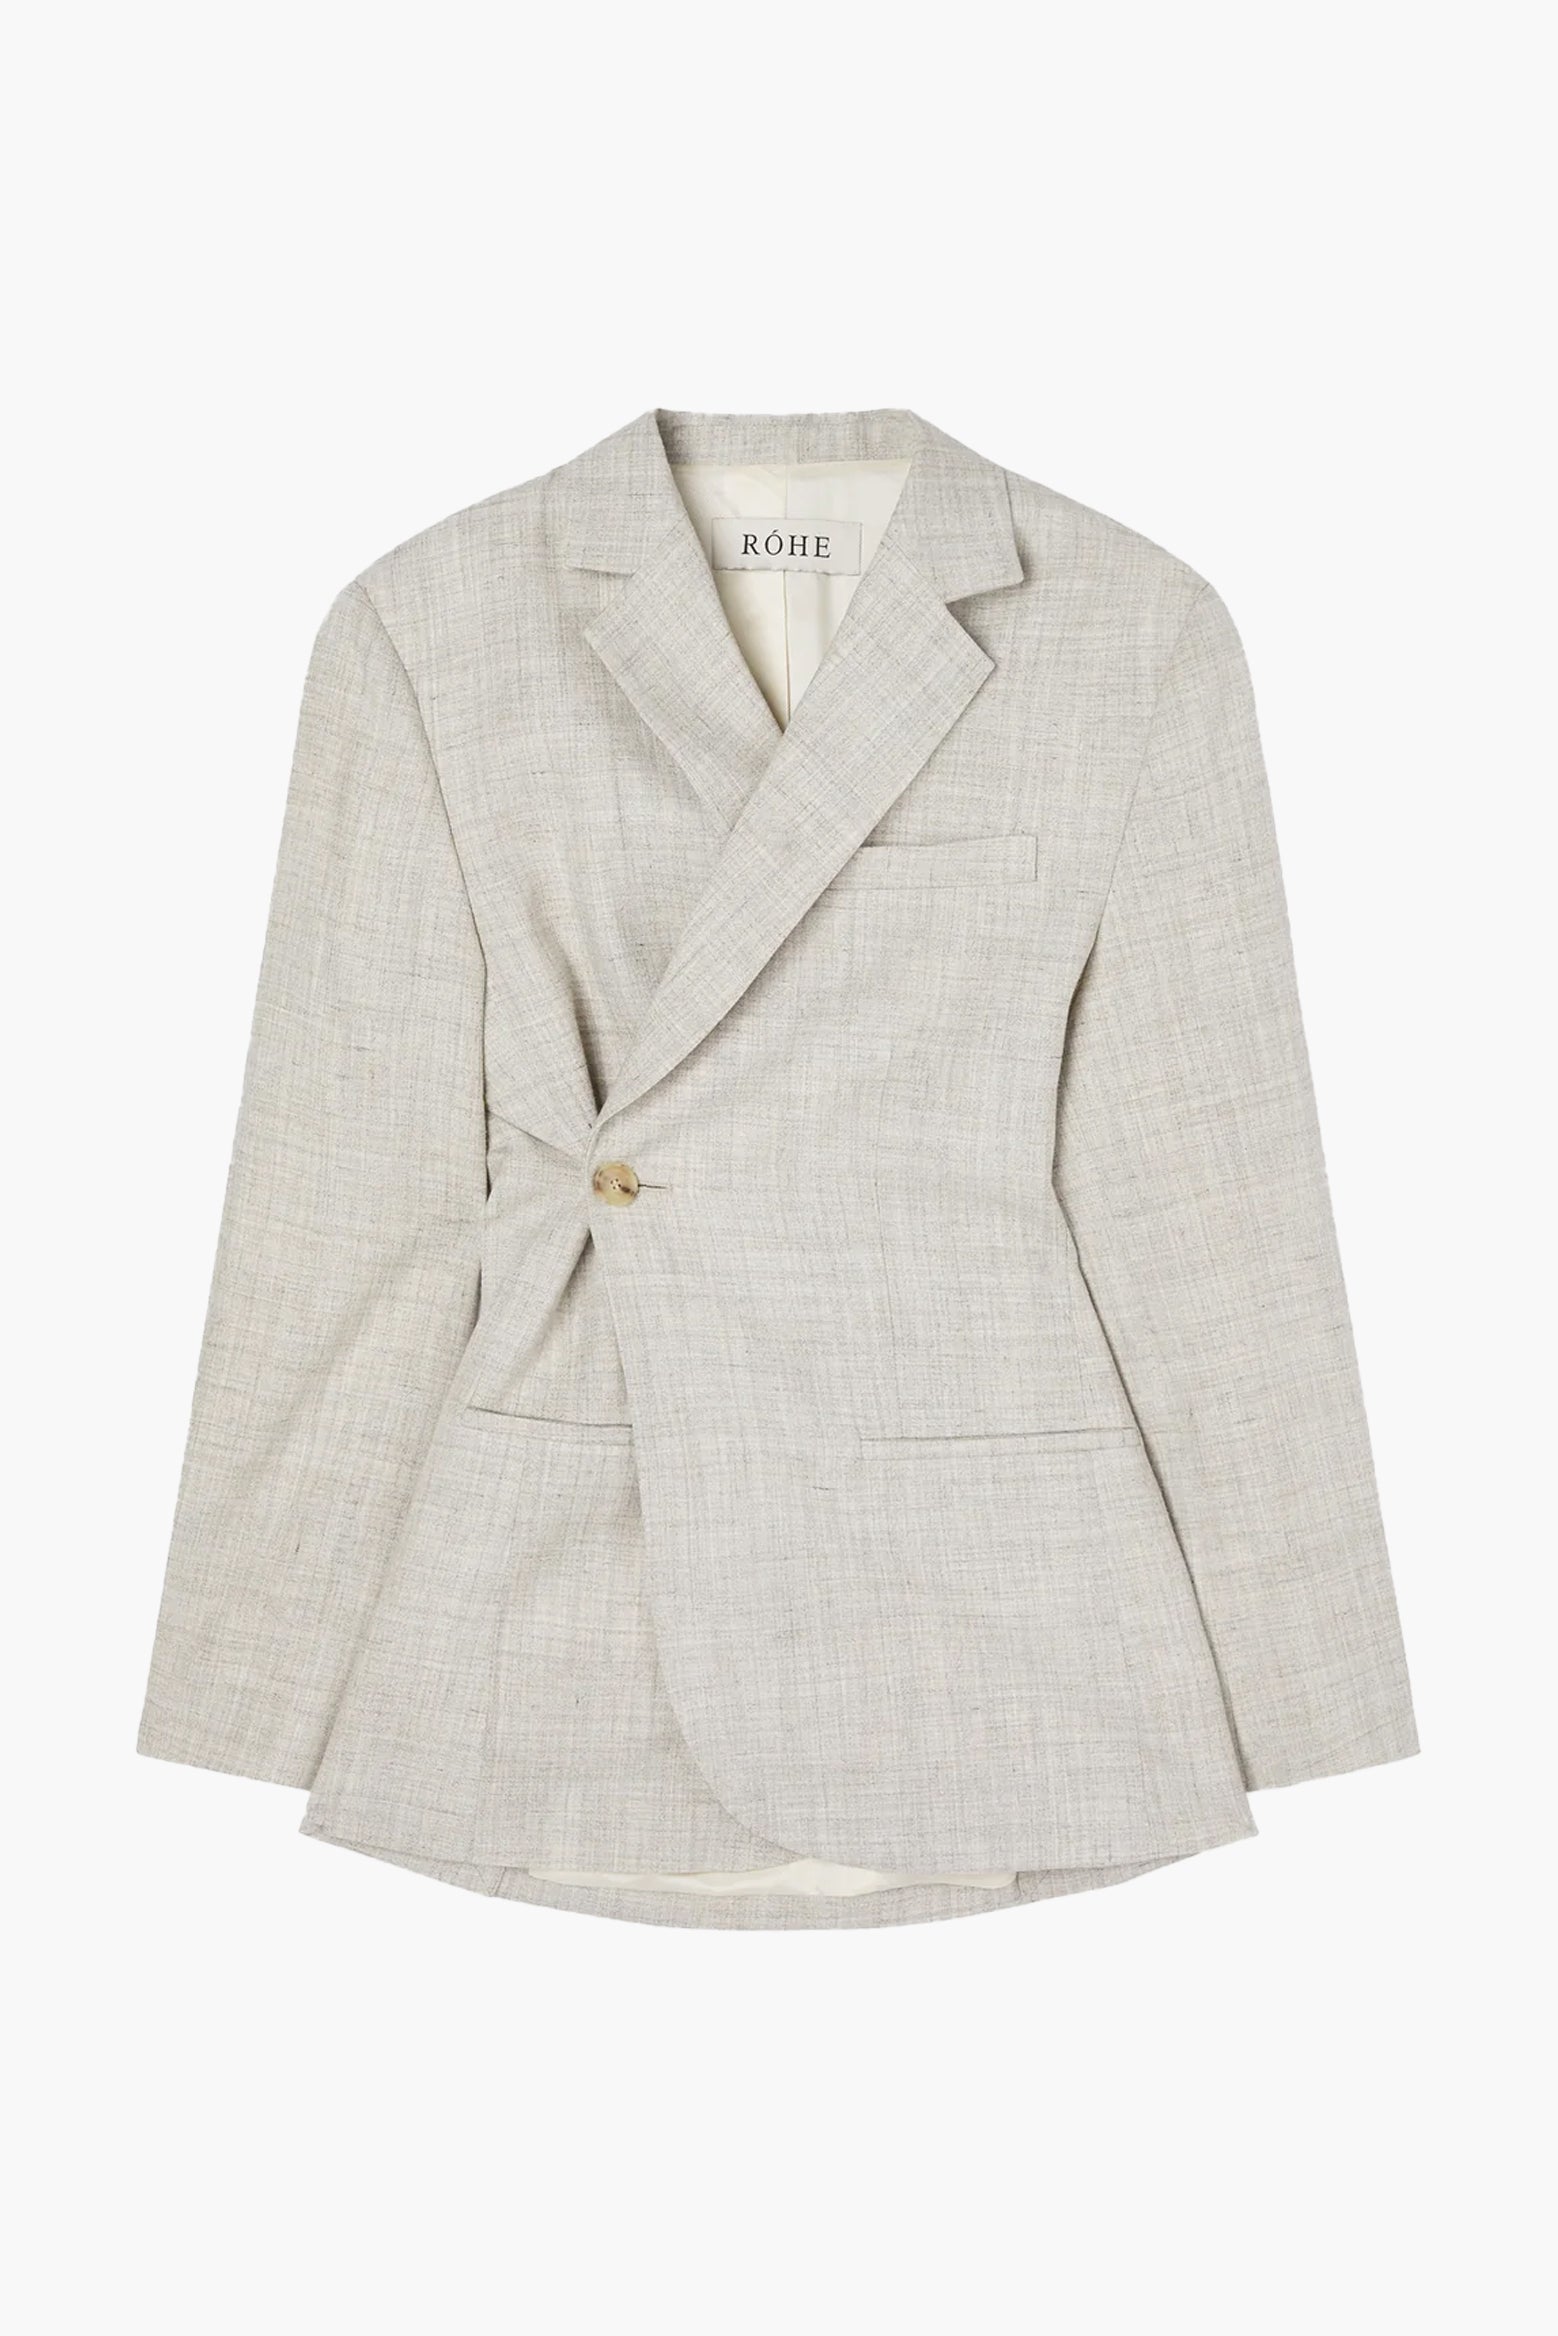 The Rohe Overlap Blazer in Stone Melange available at The New Trend Australia